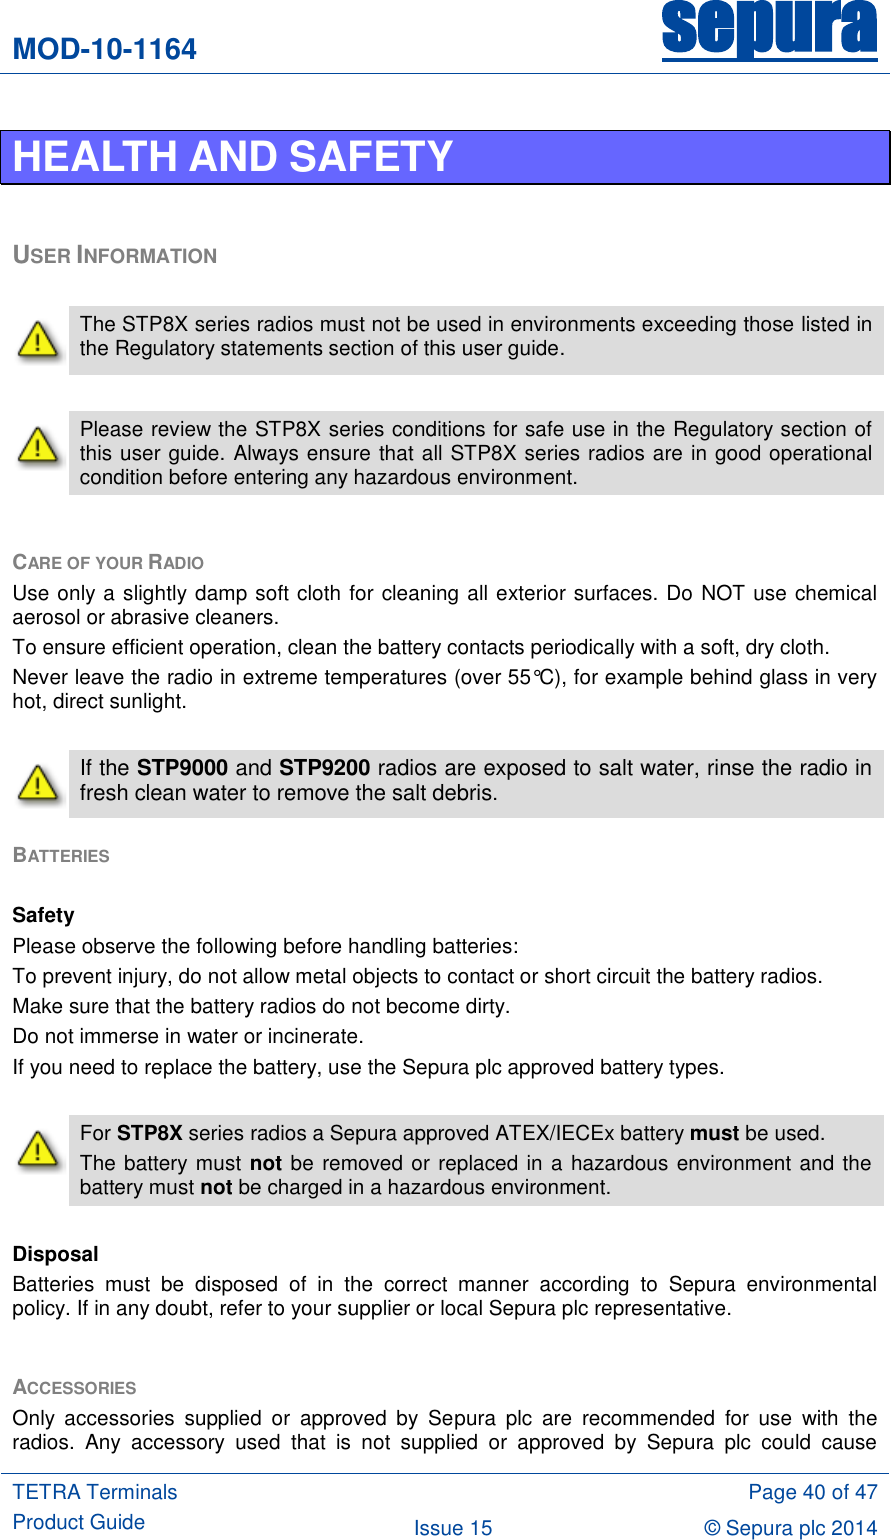 MOD-10-1164 sepura  TETRA Terminals Product Guide  Page 40 of 47 Issue 15 © Sepura plc 2014   HEALTH AND SAFETY  USER INFORMATION   The STP8X series radios must not be used in environments exceeding those listed in the Regulatory statements section of this user guide.   Please review the STP8X series conditions for safe use in the Regulatory section of this user guide. Always ensure that all STP8X series radios are in good operational condition before entering any hazardous environment.  CARE OF YOUR RADIO Use only a slightly damp soft cloth for cleaning all exterior surfaces. Do NOT use chemical aerosol or abrasive cleaners.  To ensure efficient operation, clean the battery contacts periodically with a soft, dry cloth. Never leave the radio in extreme temperatures (over 55°C), for example behind glass in very hot, direct sunlight.   If the STP9000 and STP9200 radios are exposed to salt water, rinse the radio in fresh clean water to remove the salt debris. BATTERIES   Safety Please observe the following before handling batteries: To prevent injury, do not allow metal objects to contact or short circuit the battery radios. Make sure that the battery radios do not become dirty. Do not immerse in water or incinerate. If you need to replace the battery, use the Sepura plc approved battery types.   For STP8X series radios a Sepura approved ATEX/IECEx battery must be used. The battery must not be removed or replaced in a hazardous environment and the battery must not be charged in a hazardous environment.  Disposal Batteries  must  be  disposed  of  in  the  correct  manner  according  to  Sepura  environmental policy. If in any doubt, refer to your supplier or local Sepura plc representative.  ACCESSORIES Only  accessories  supplied  or  approved  by  Sepura  plc  are  recommended  for  use  with  the radios.  Any  accessory  used  that  is  not  supplied  or  approved  by  Sepura  plc  could  cause 